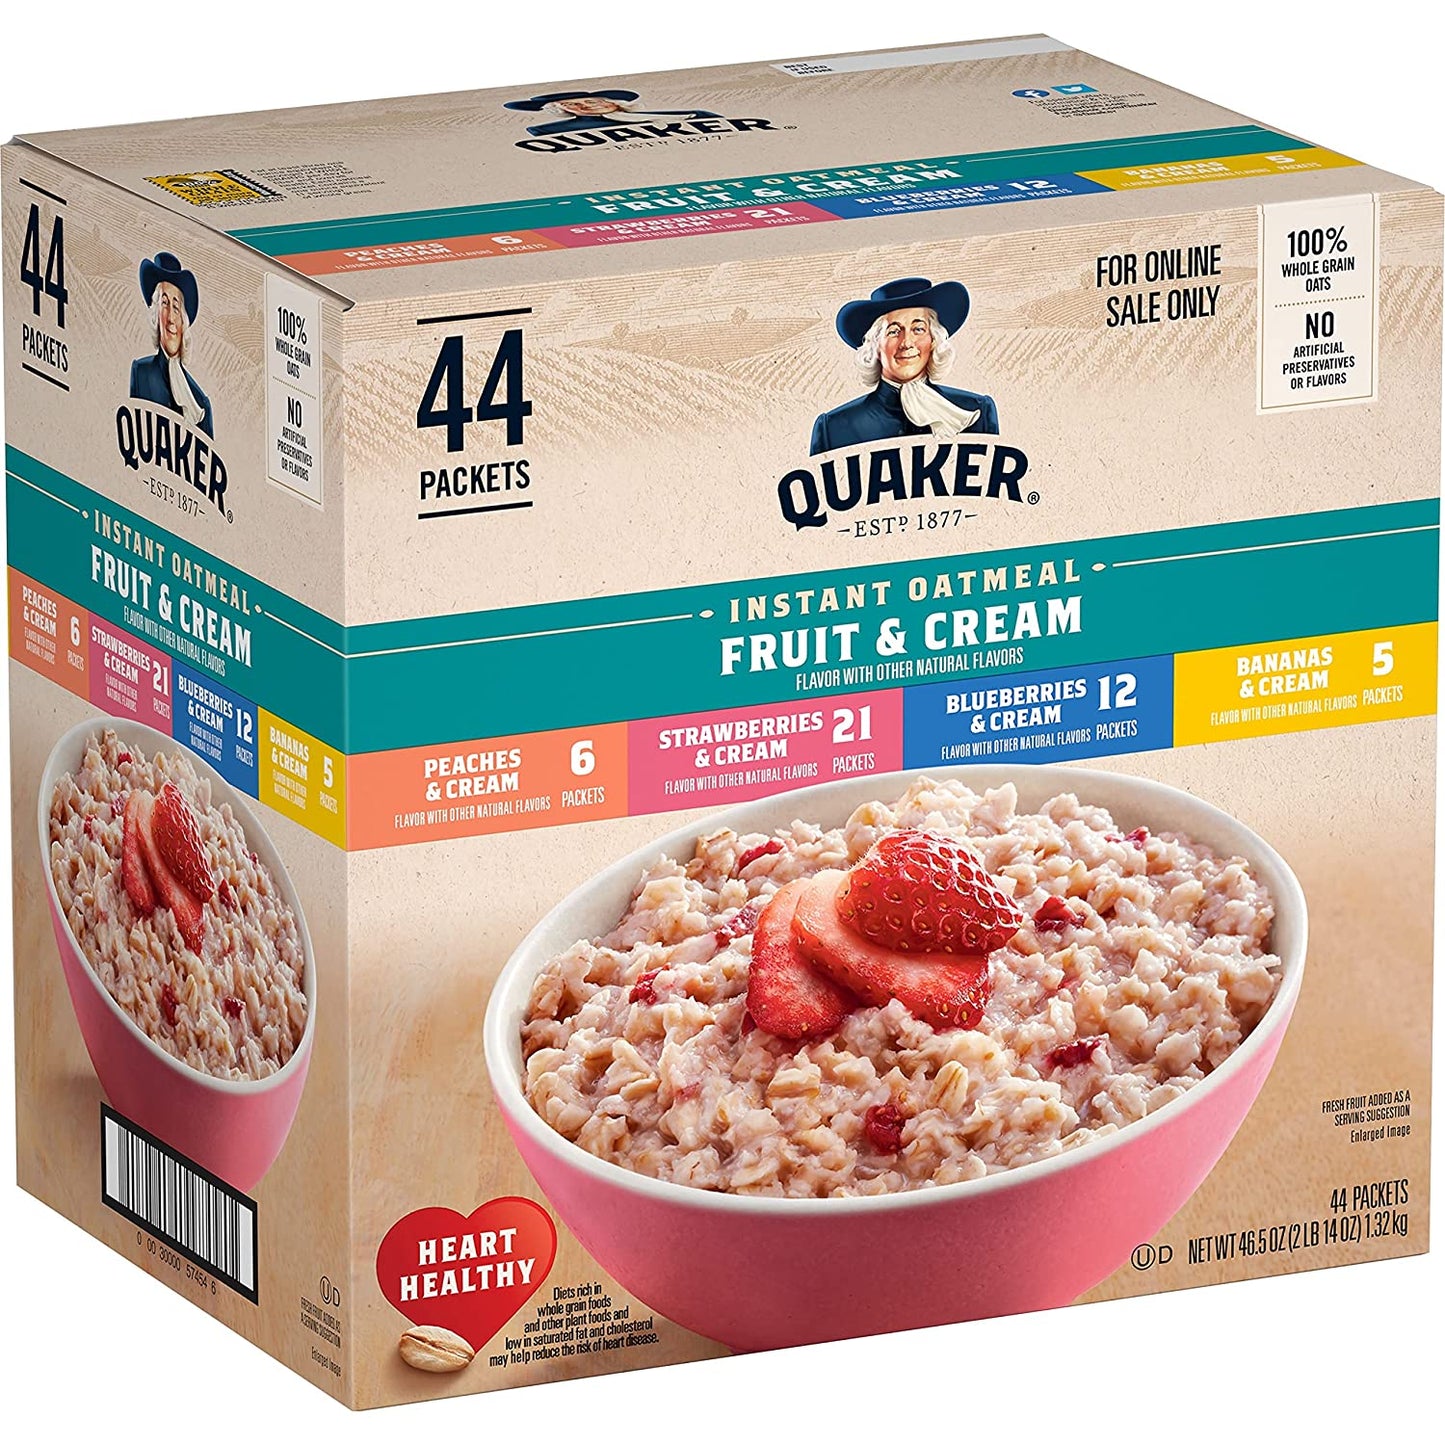 Quaker Instant Oatmeal Fruit & Cream Variety Pack, Multiple Colors, 44 Count